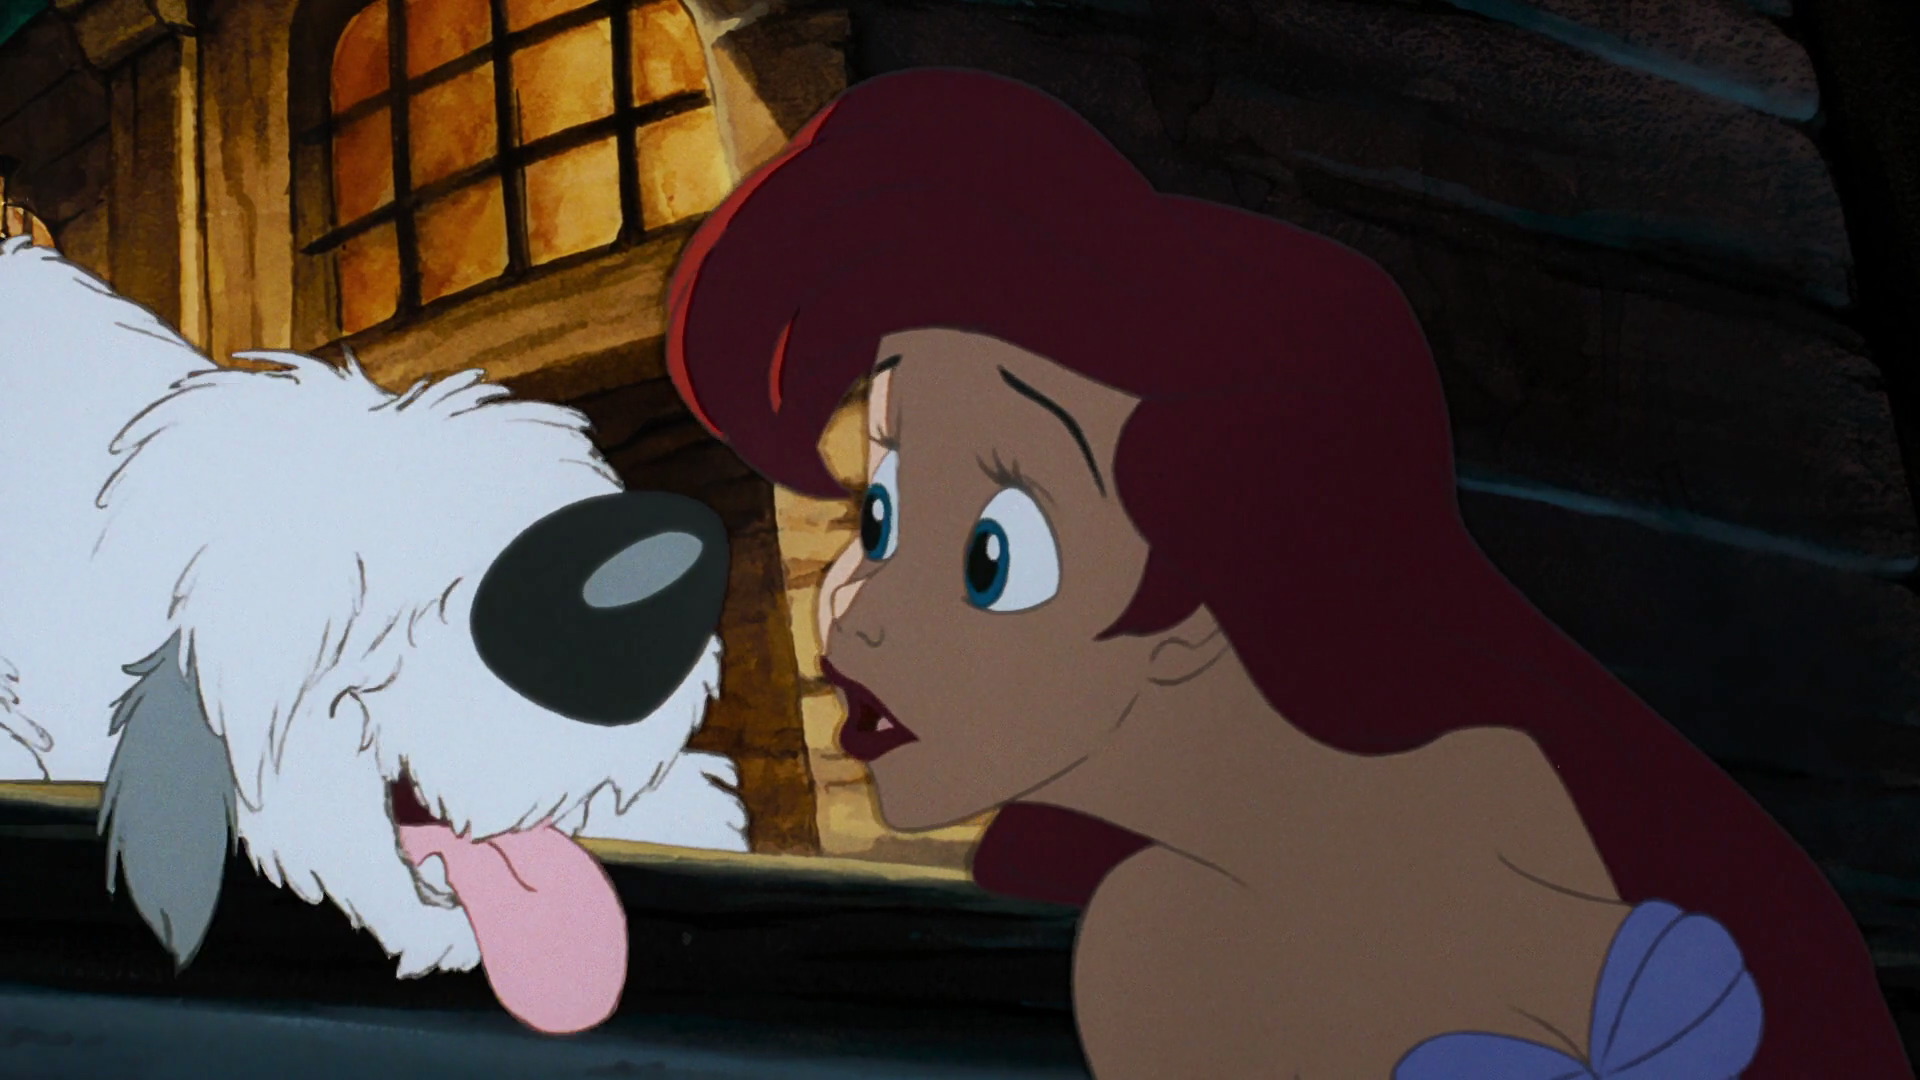 Prince Eric's dog and Ariel